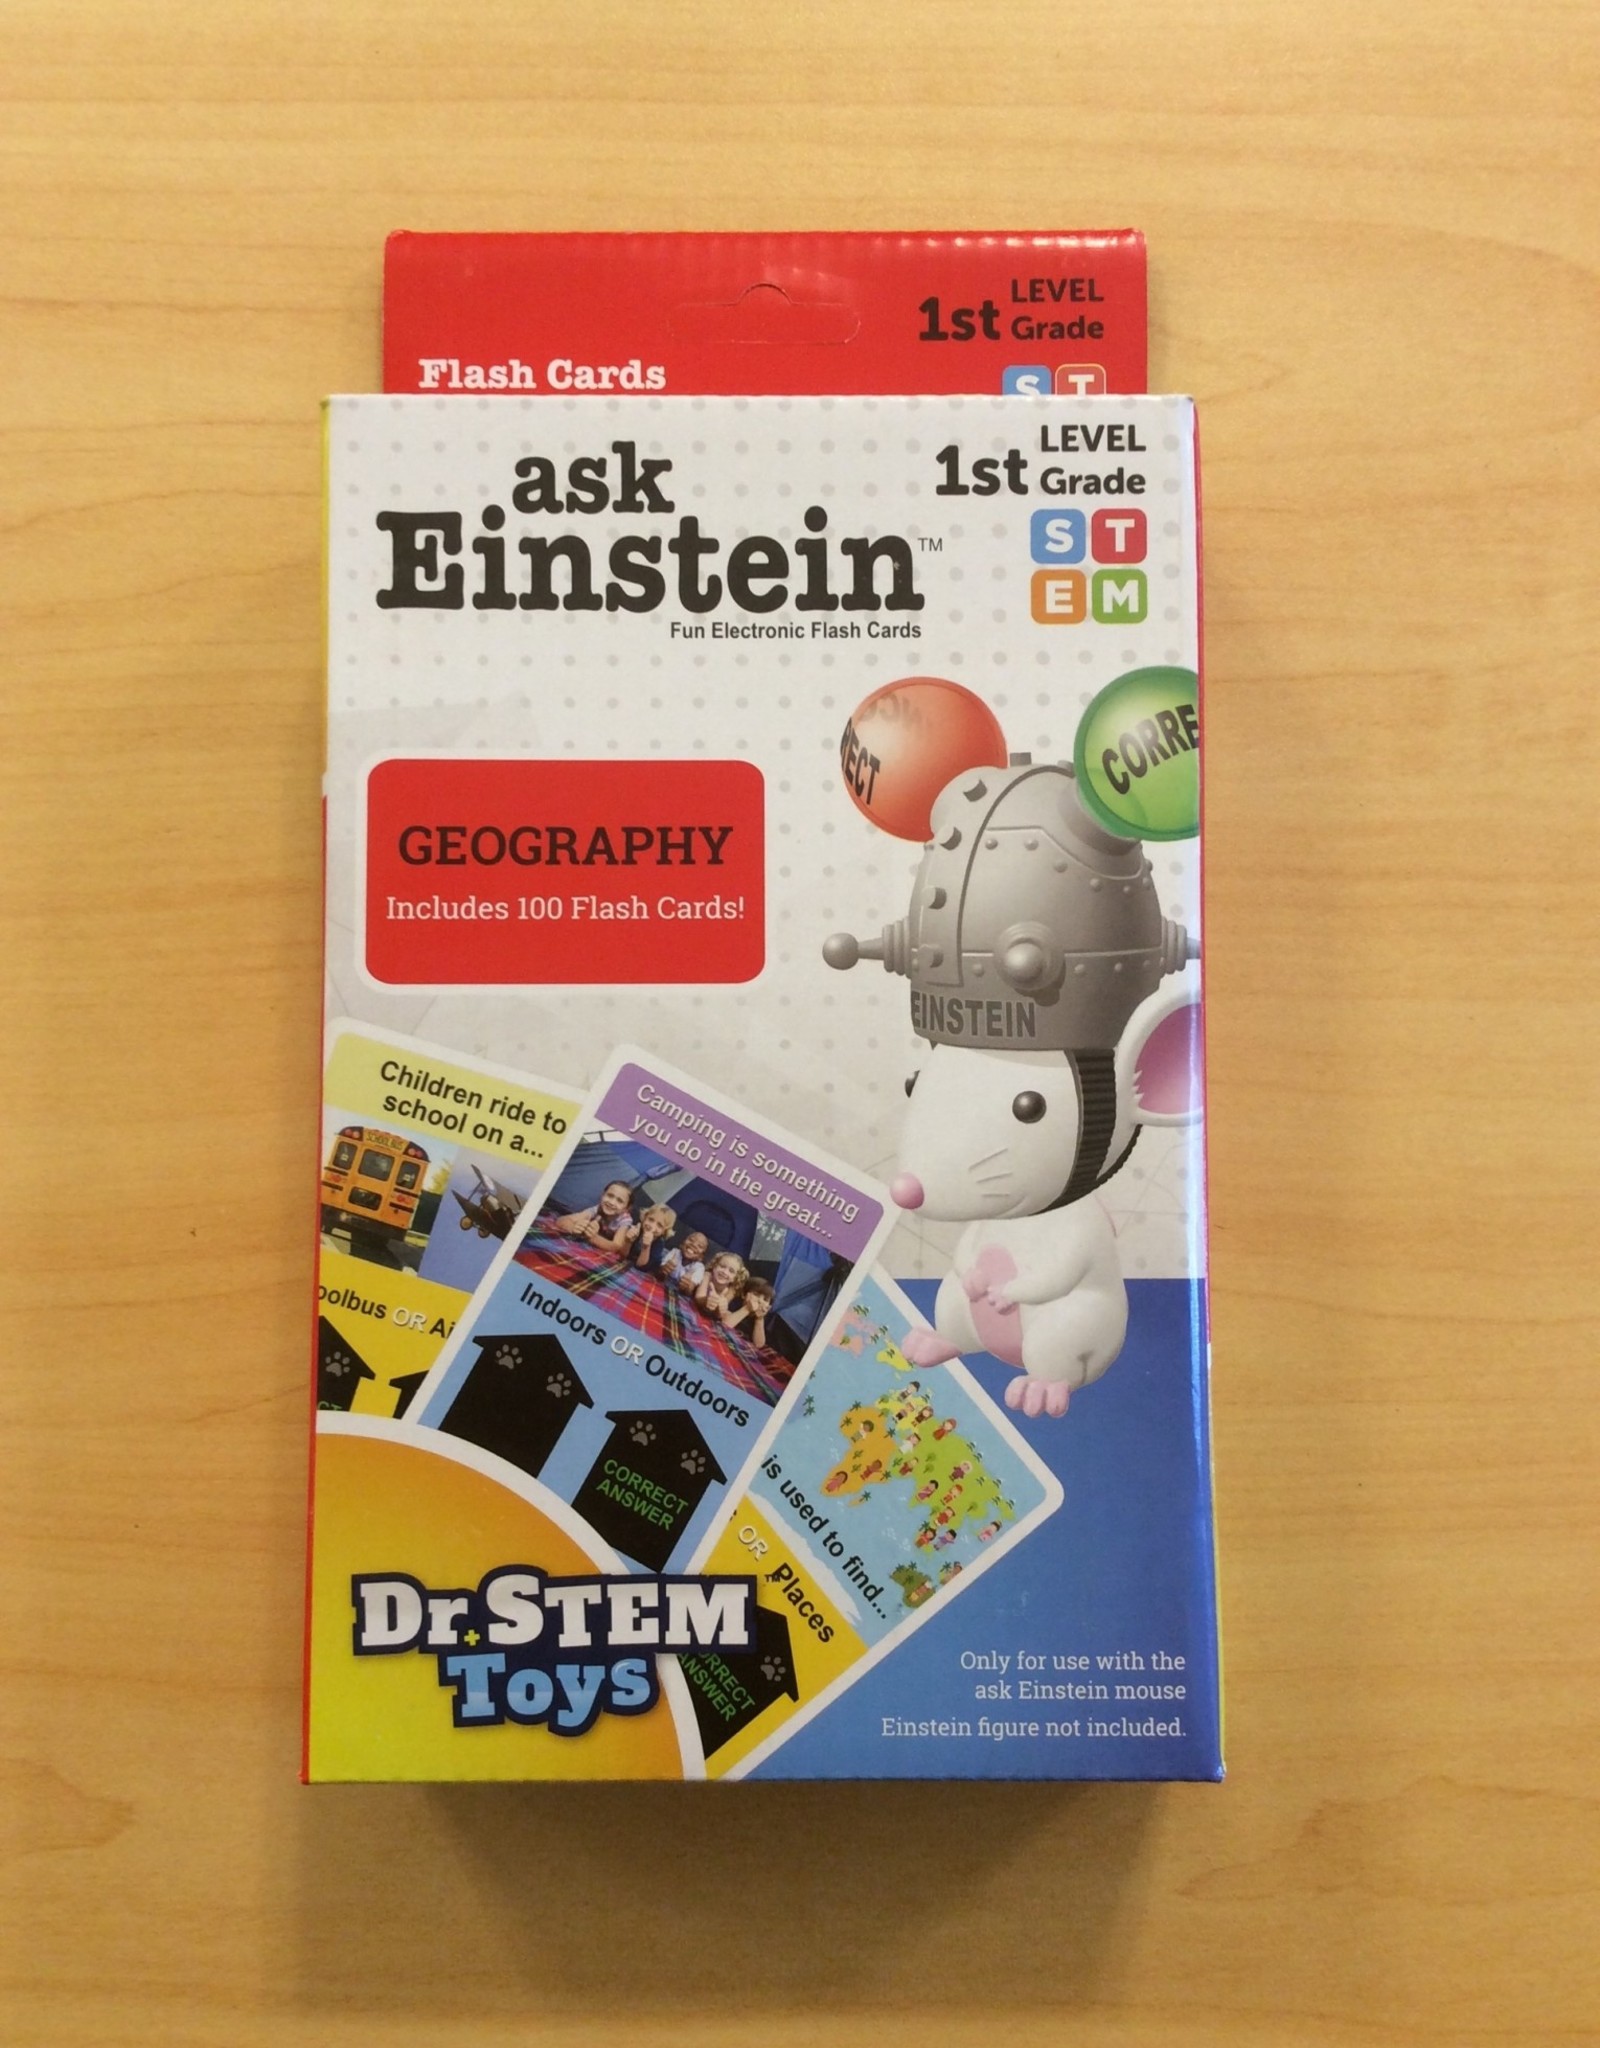 Thin Air Brands Ask Einstein - 1st Grade Geography Booster Pack